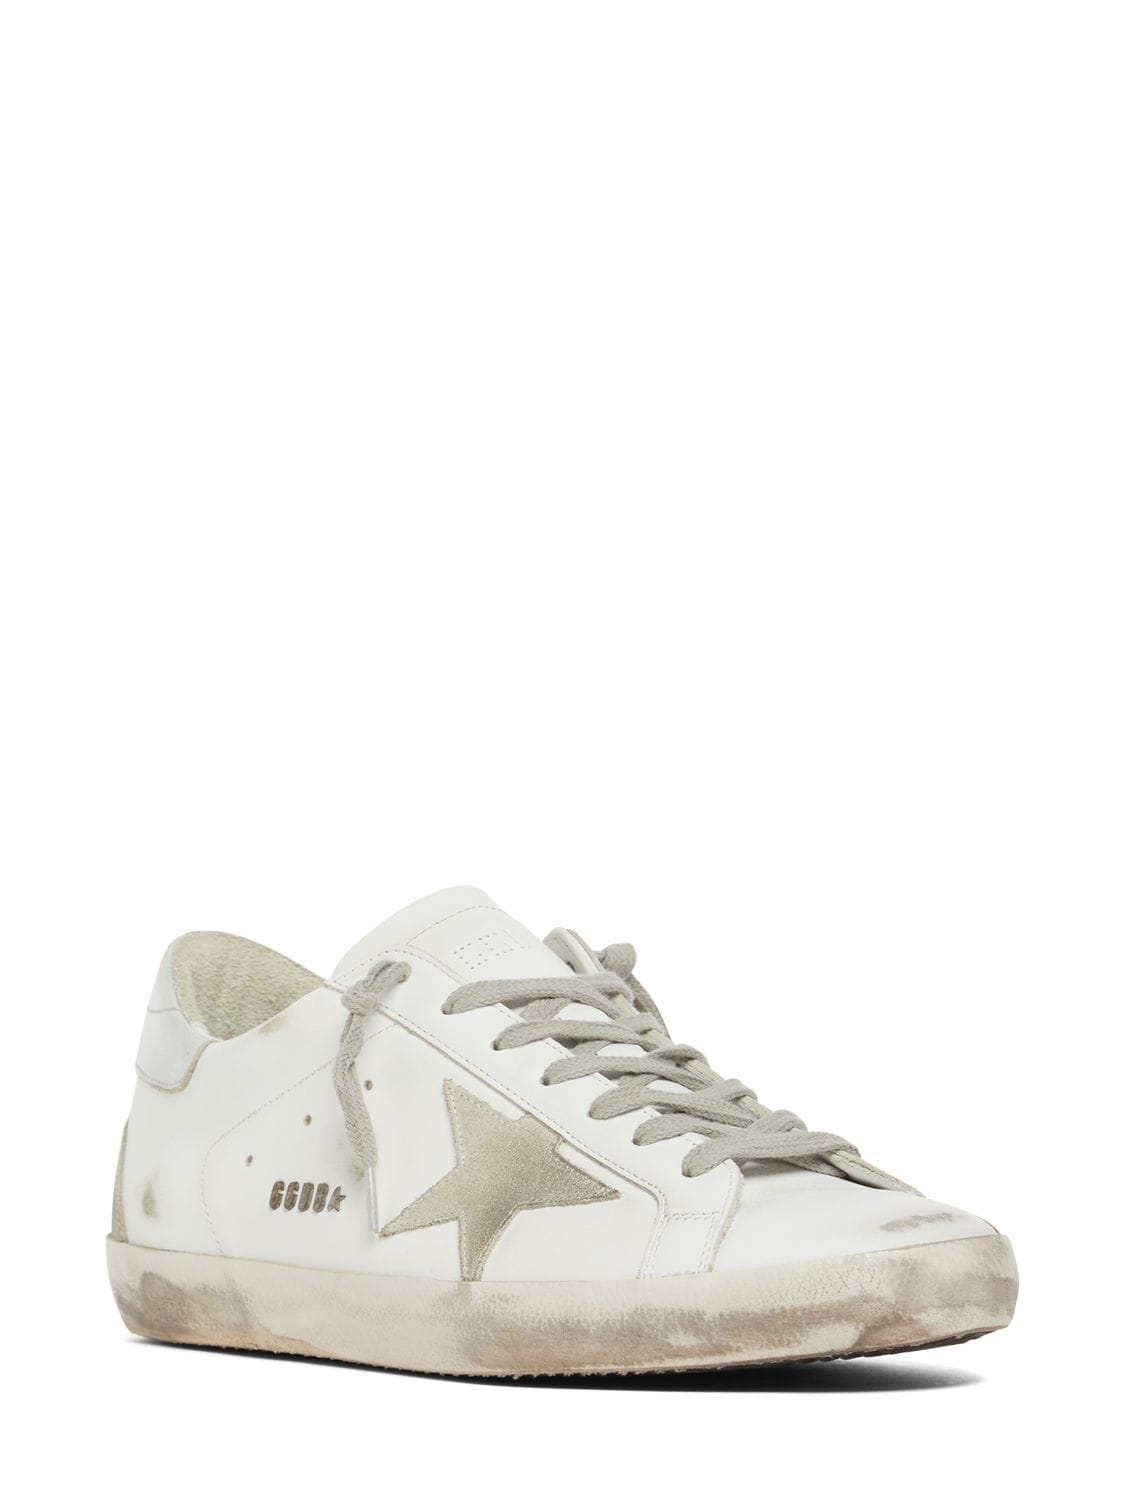 Shop Golden Goose 20mm Super Star Leather & Suede Sneakers In White,silver